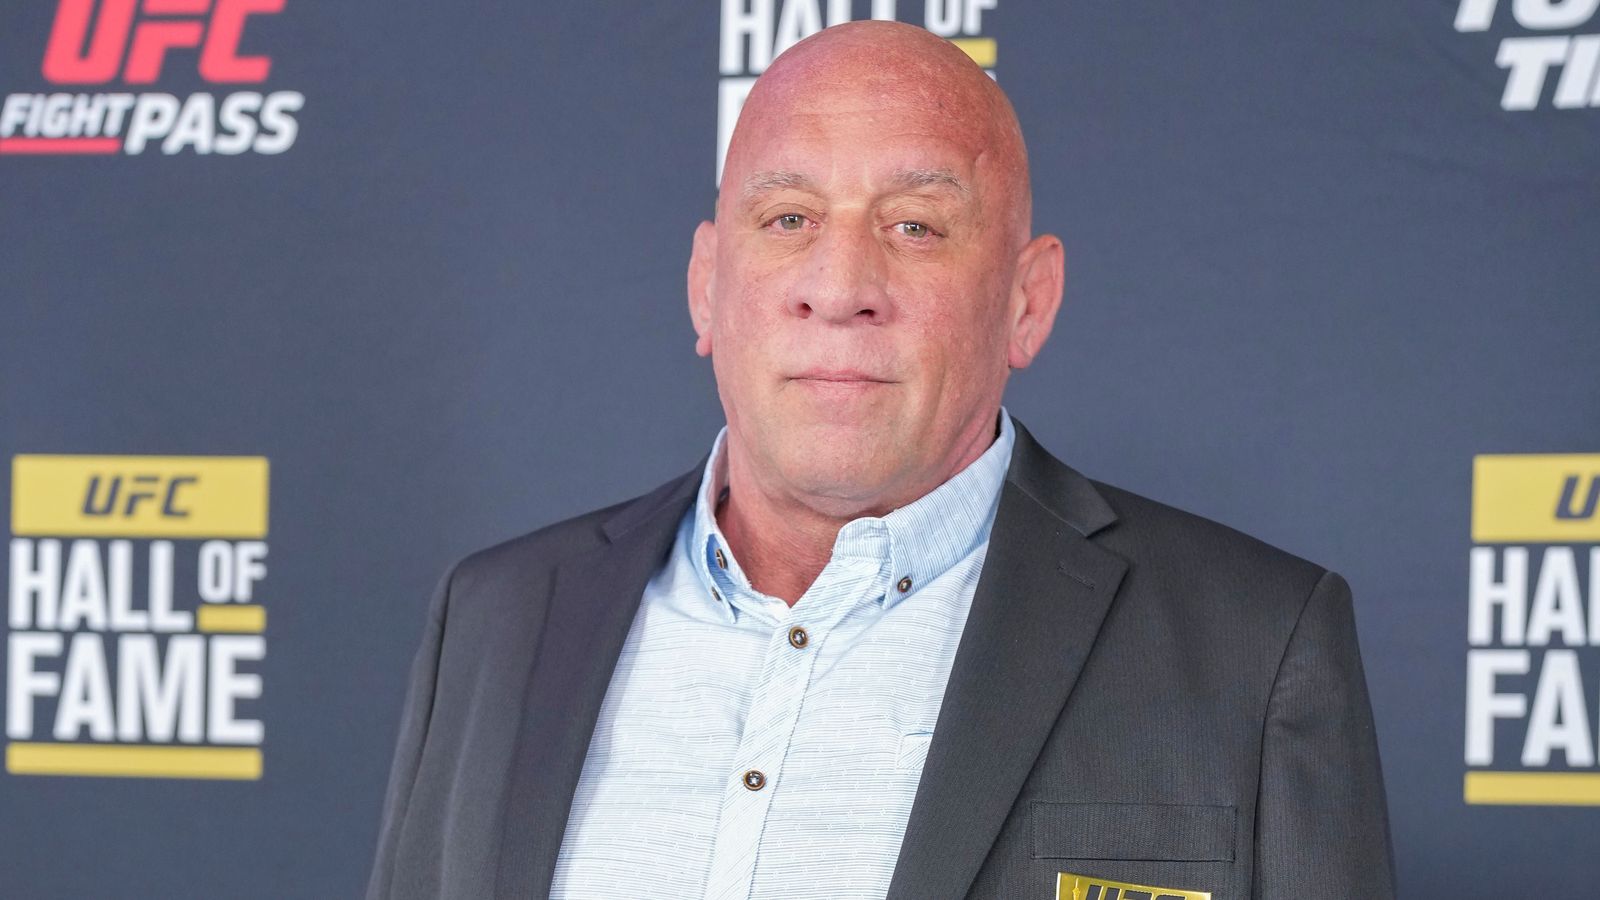 Mark Coleman, UFC Hall of Famer, shares from his hospital bed "I'm